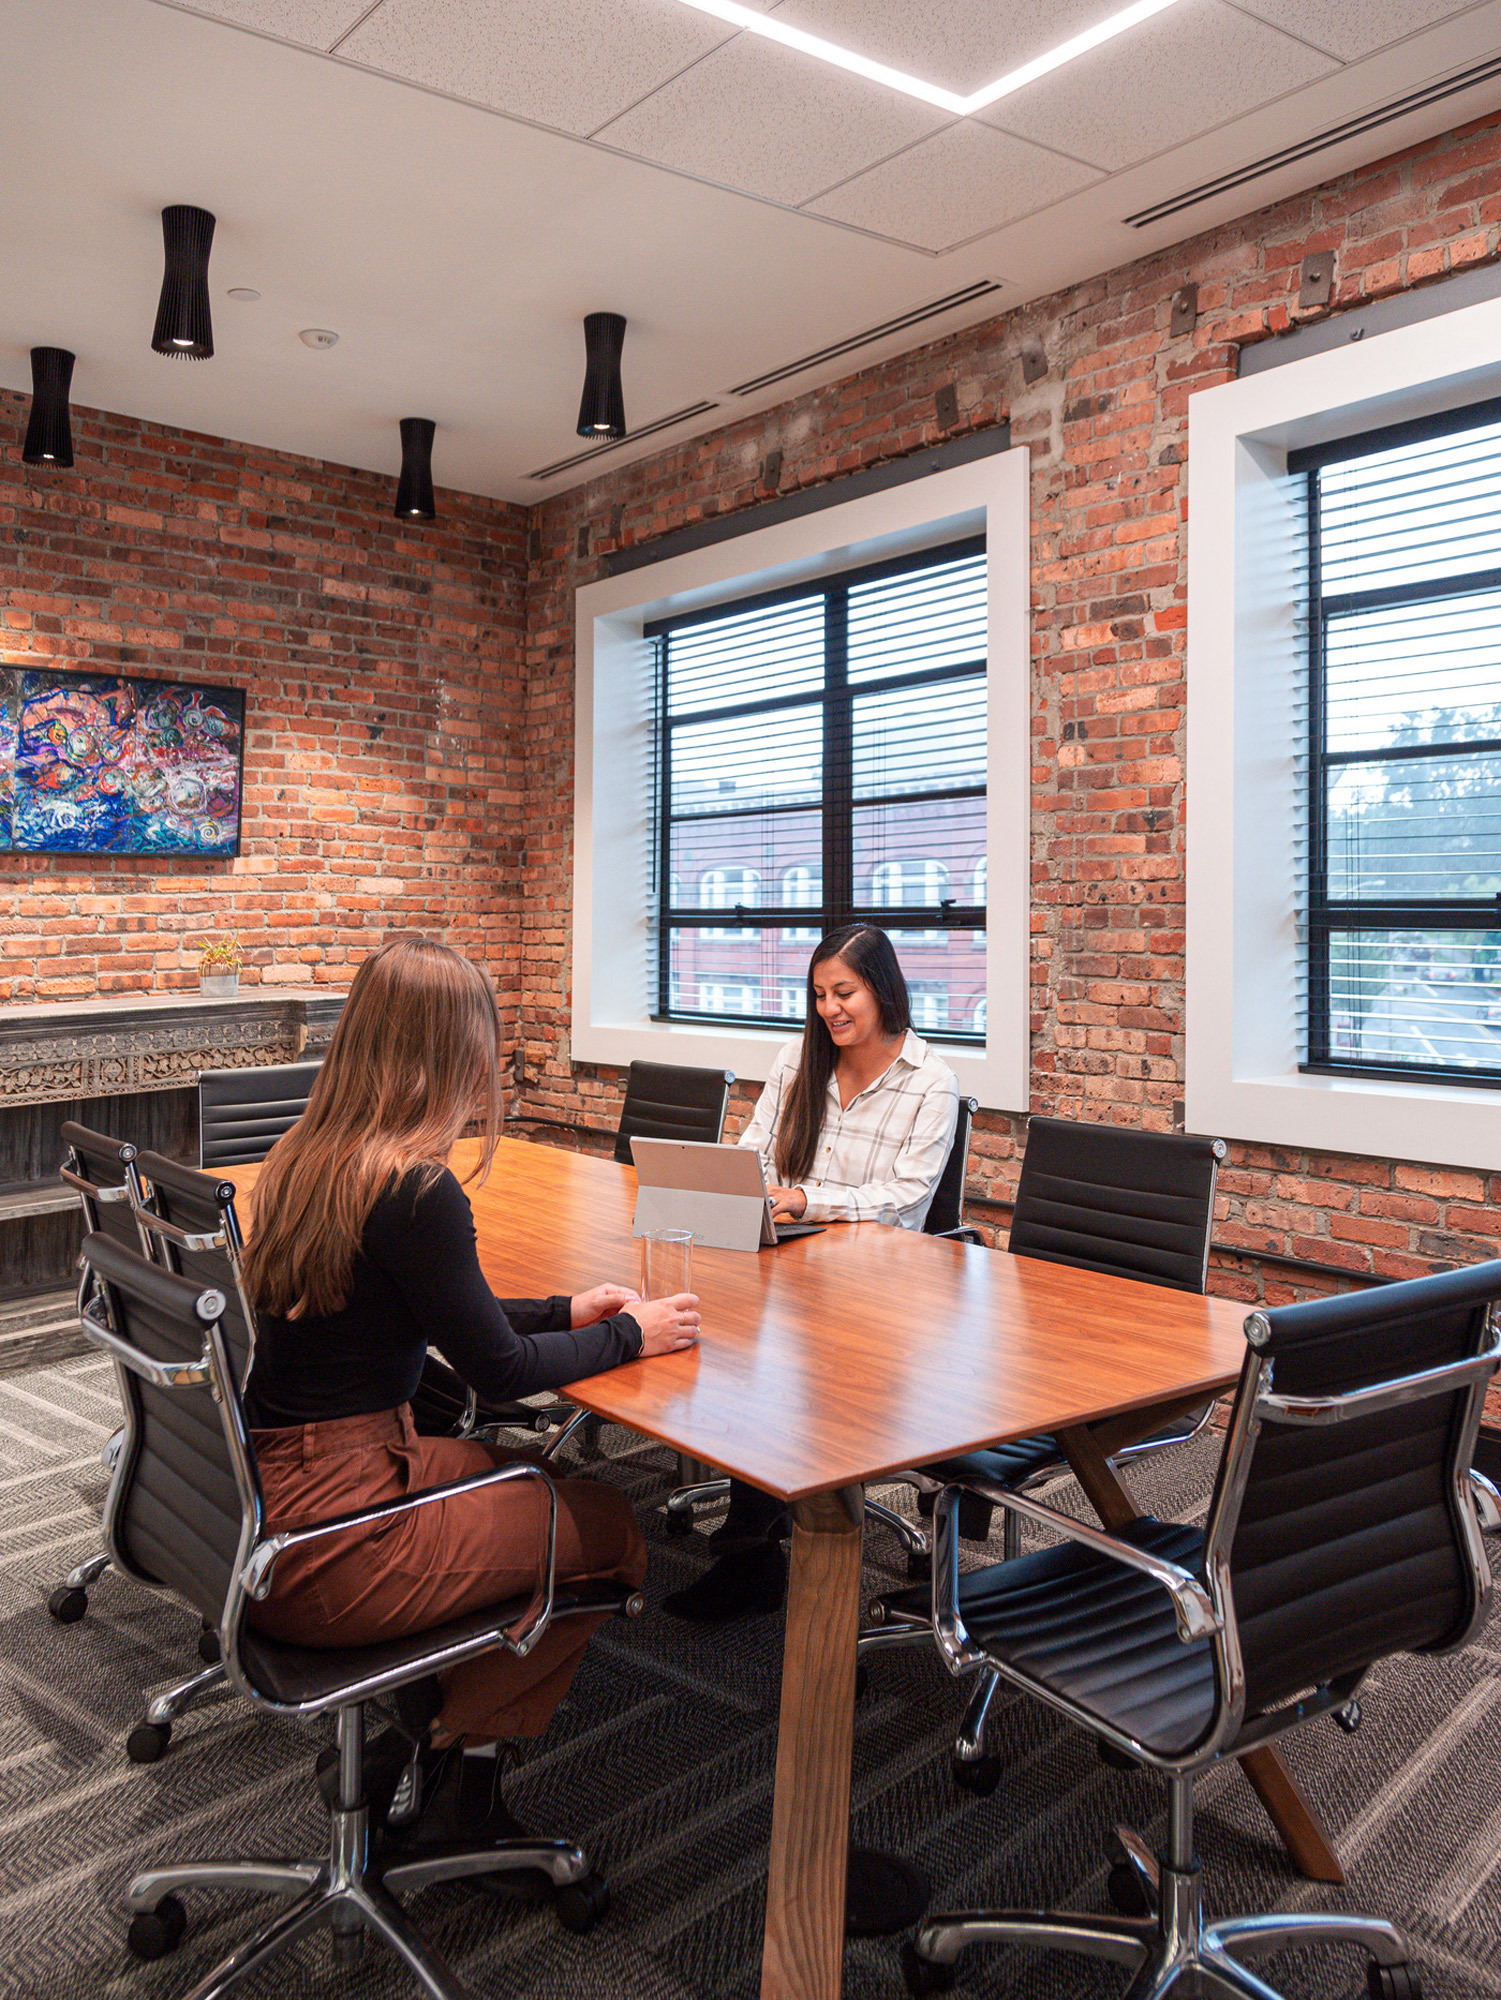 Modern office meeting space with exposed brick wall, contemporary artwork, and large windows allowing natural light. Two professionals are seated at a polished wood table on ergonomic chairs, engaging with a laptop.